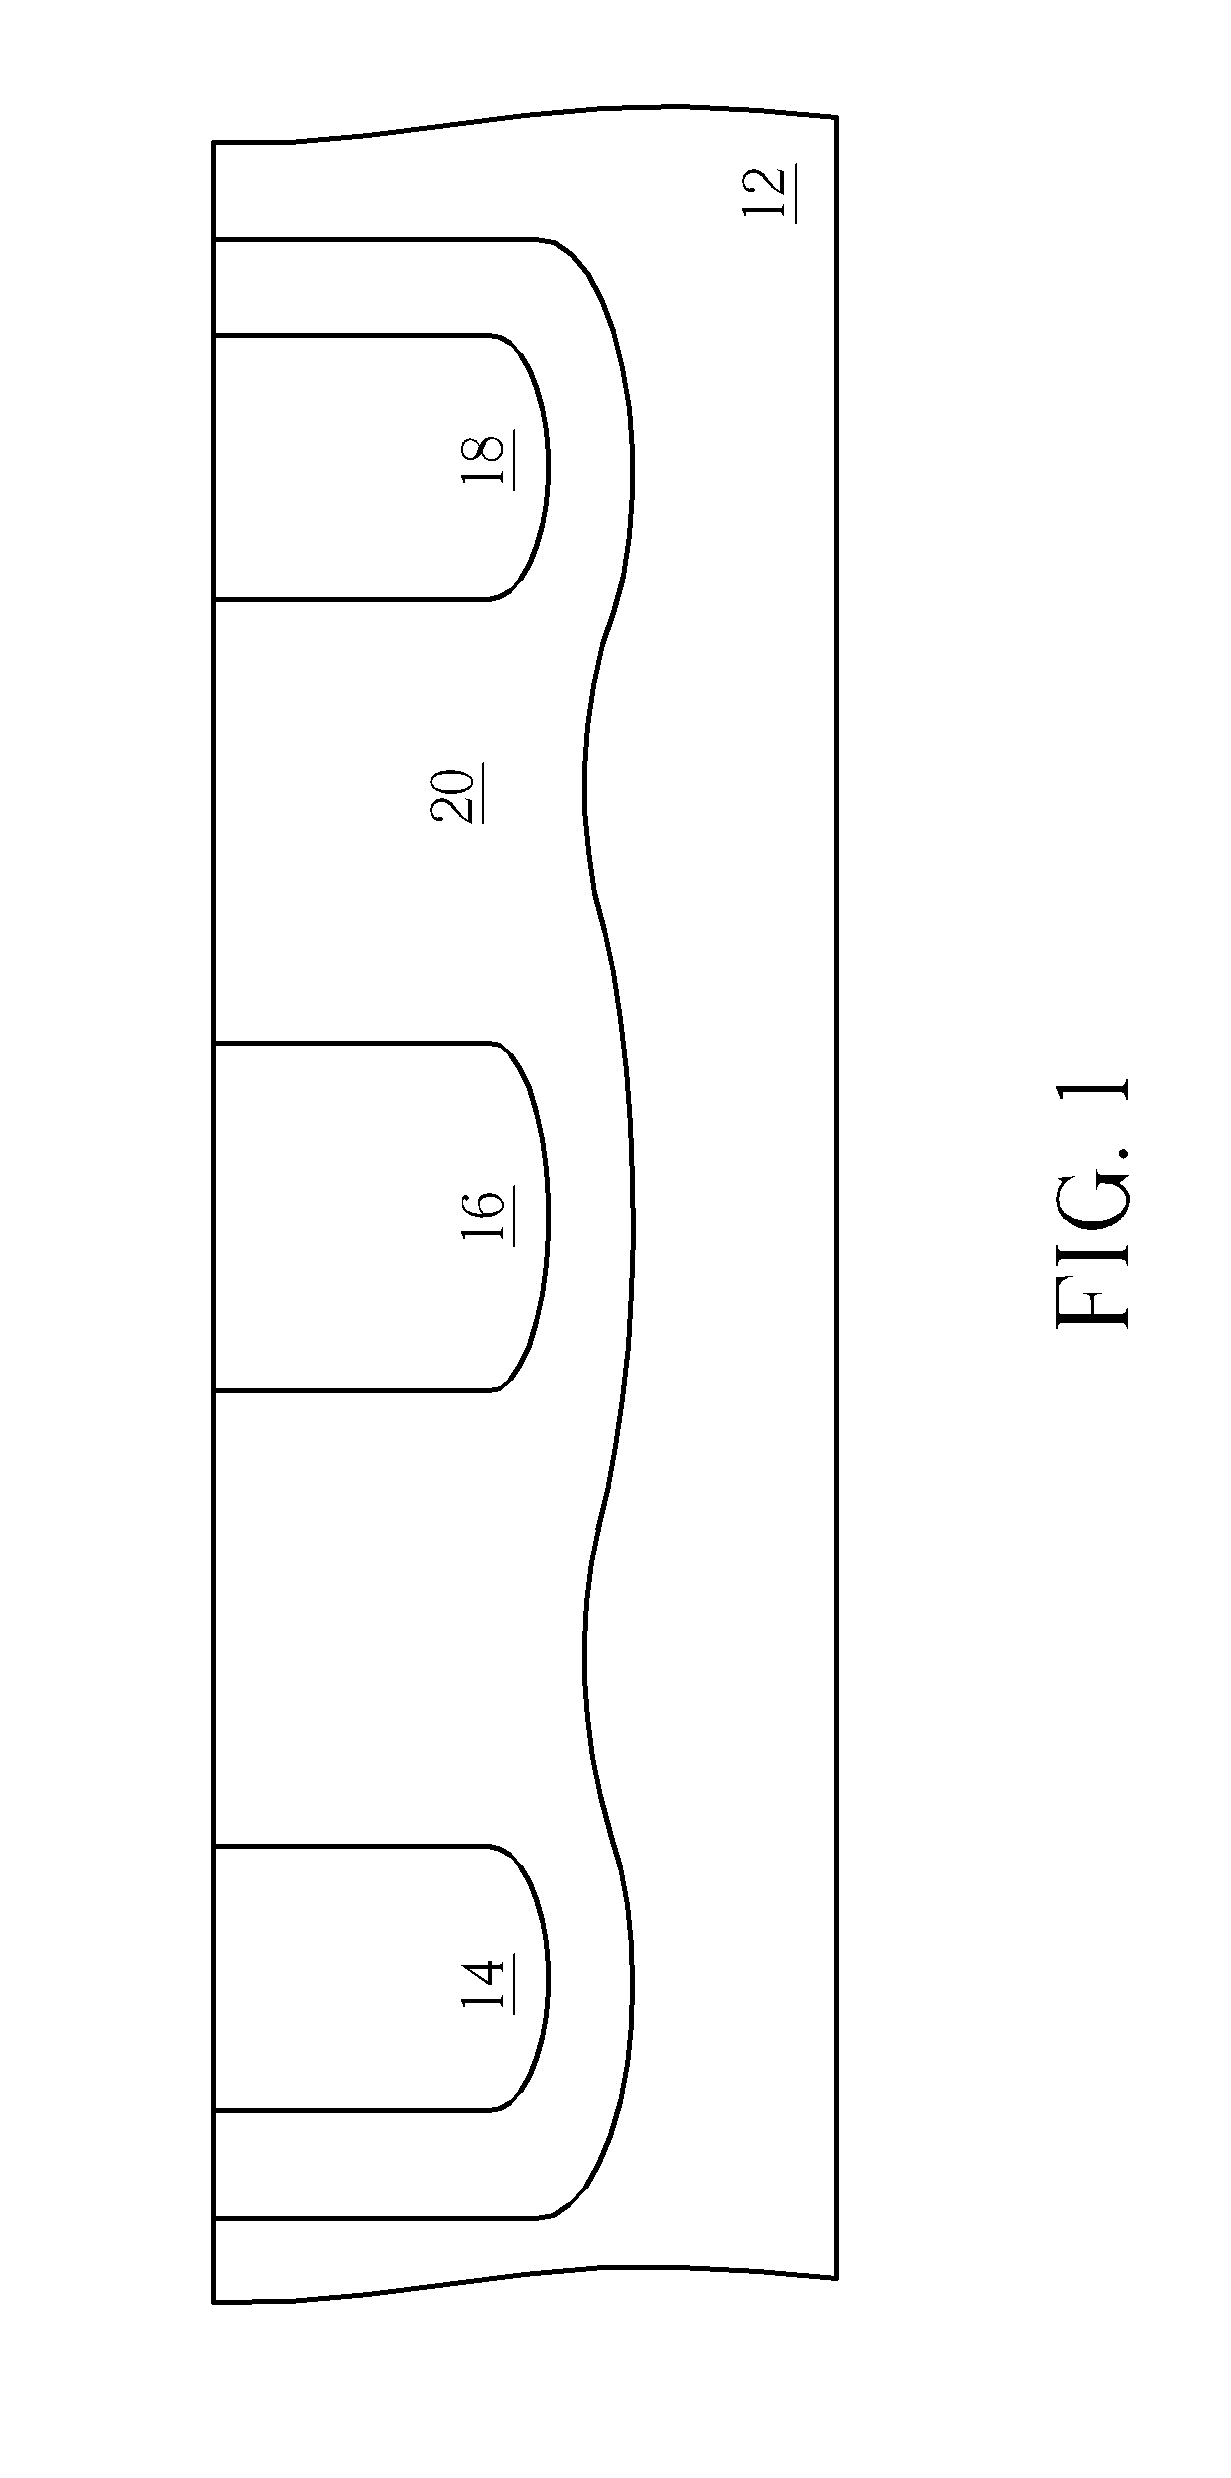 Lateral-diffusion metal-oxide semiconductor device and method for fabricating the same